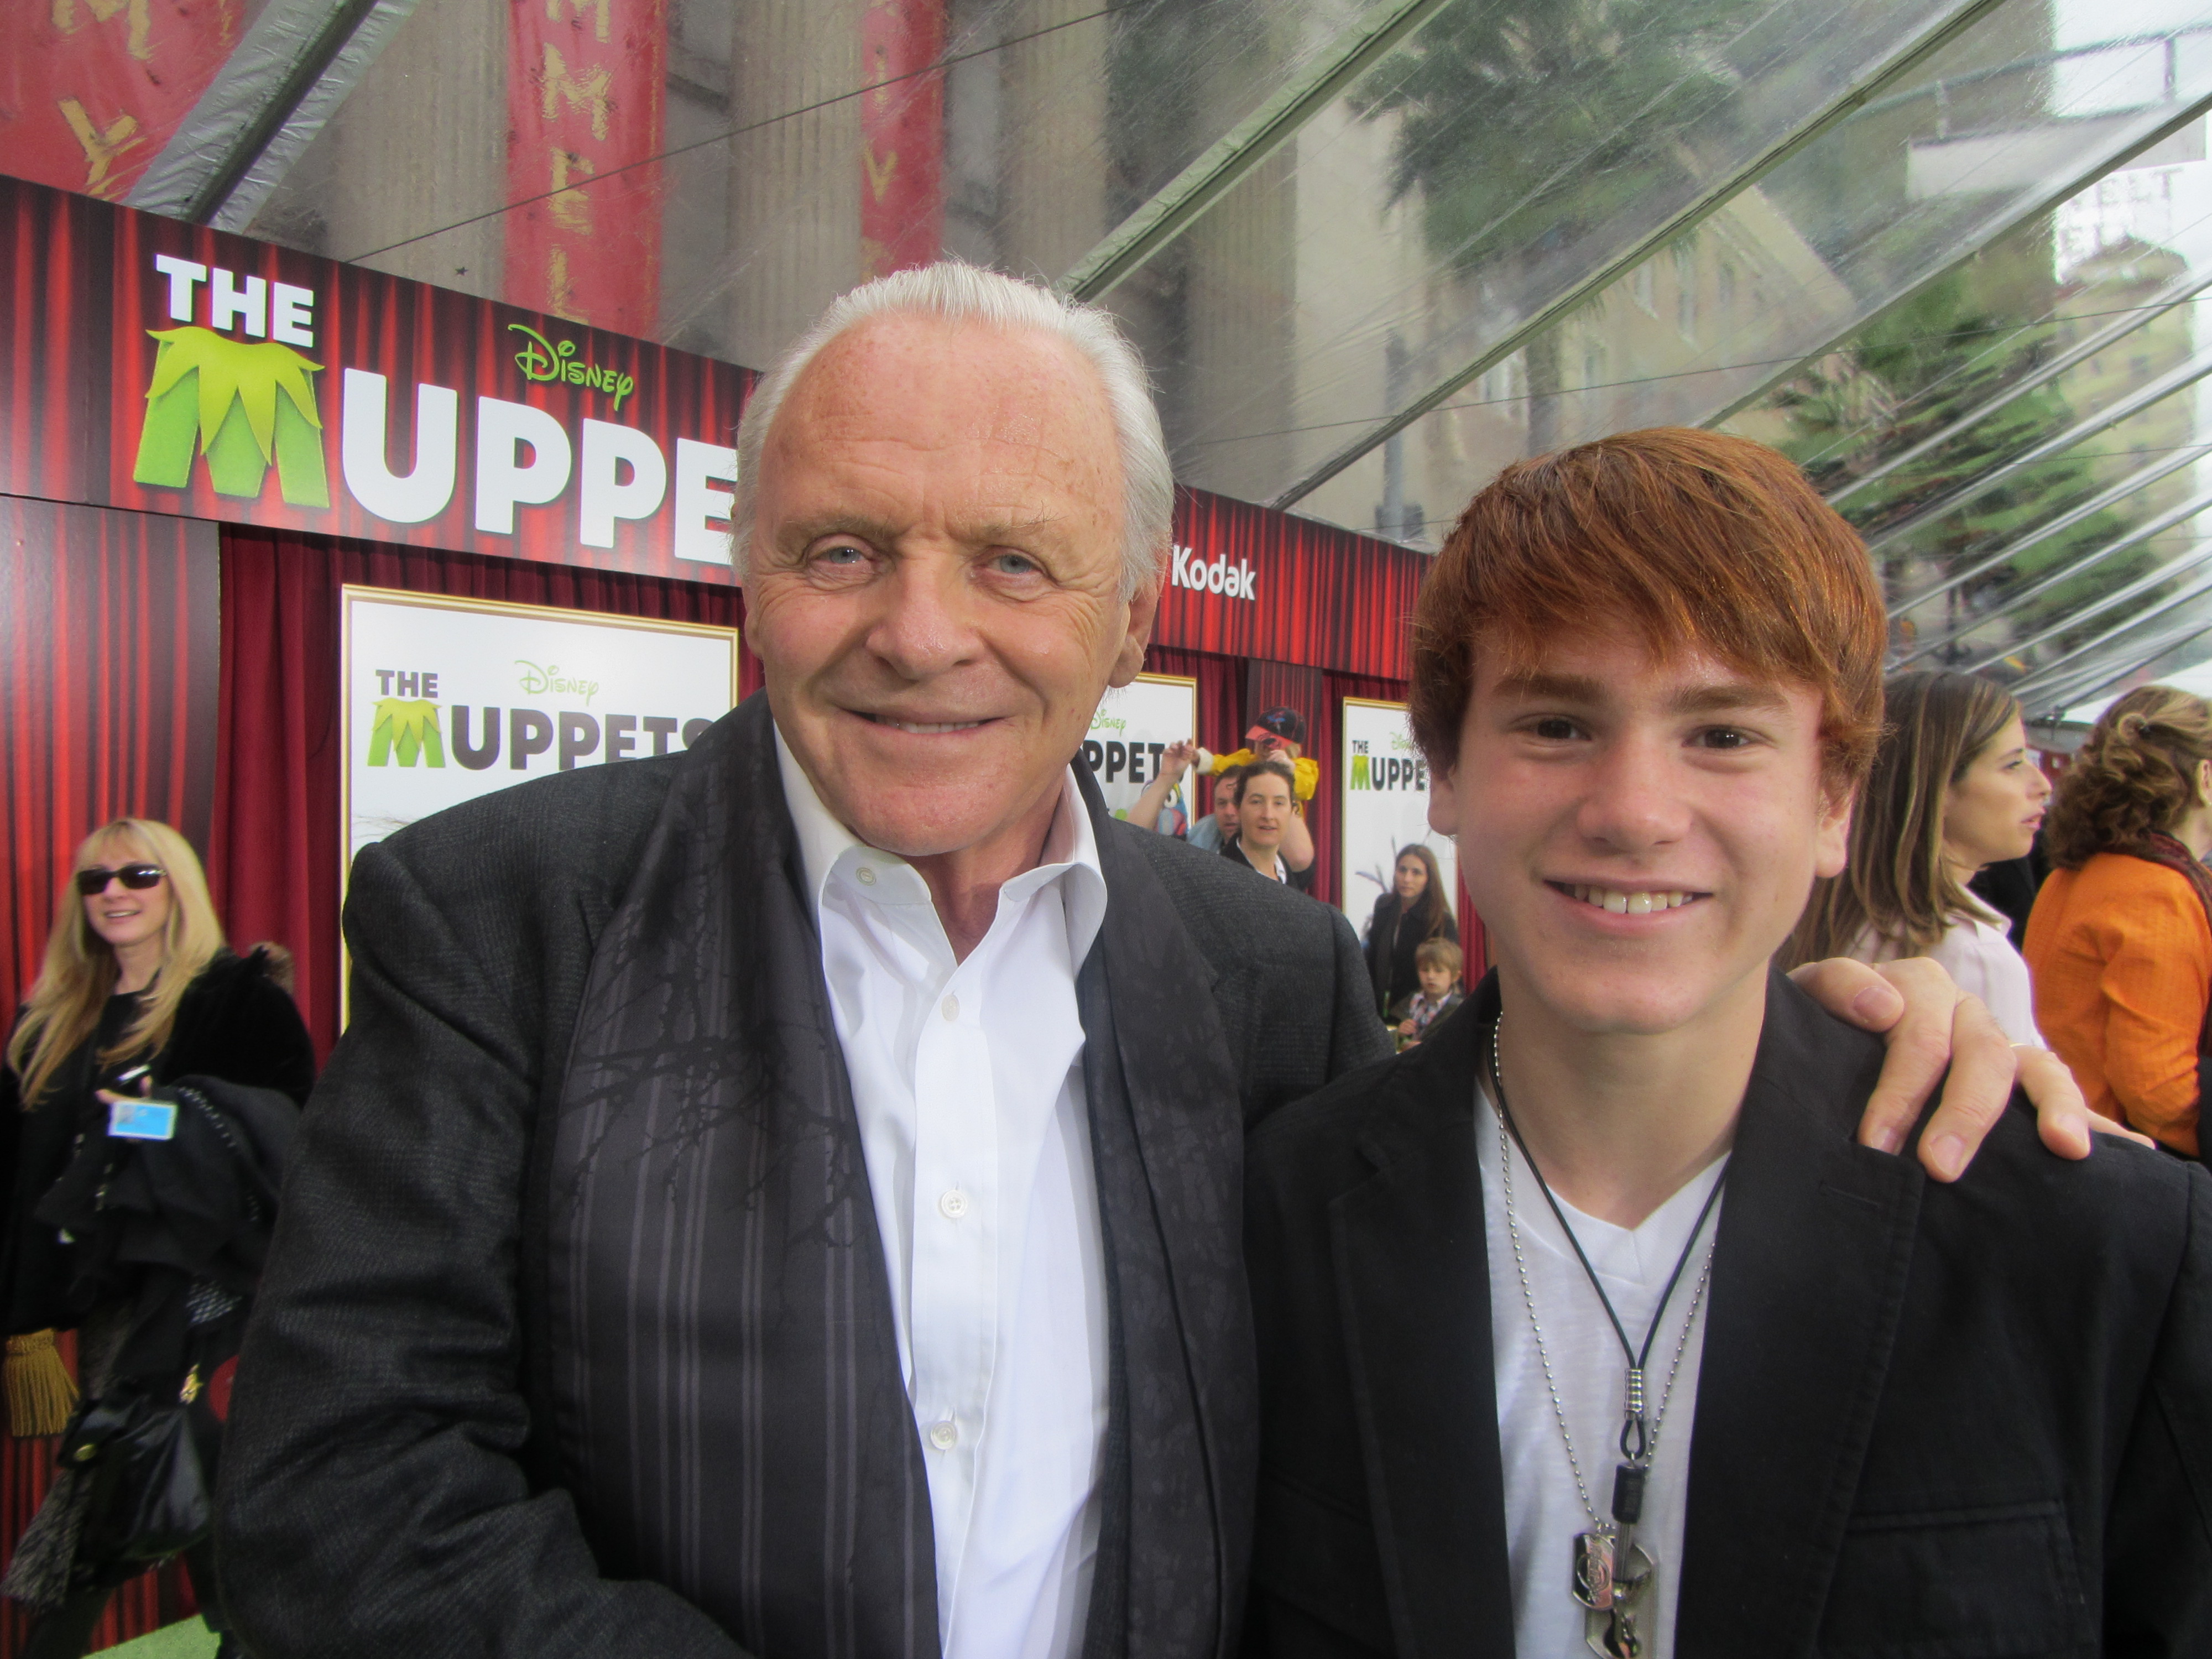 Justin Tinucci with Anthony Hopkins at the premiere of The Muppets November 12 2011 at the El Capitan Theatre, Hollywood.